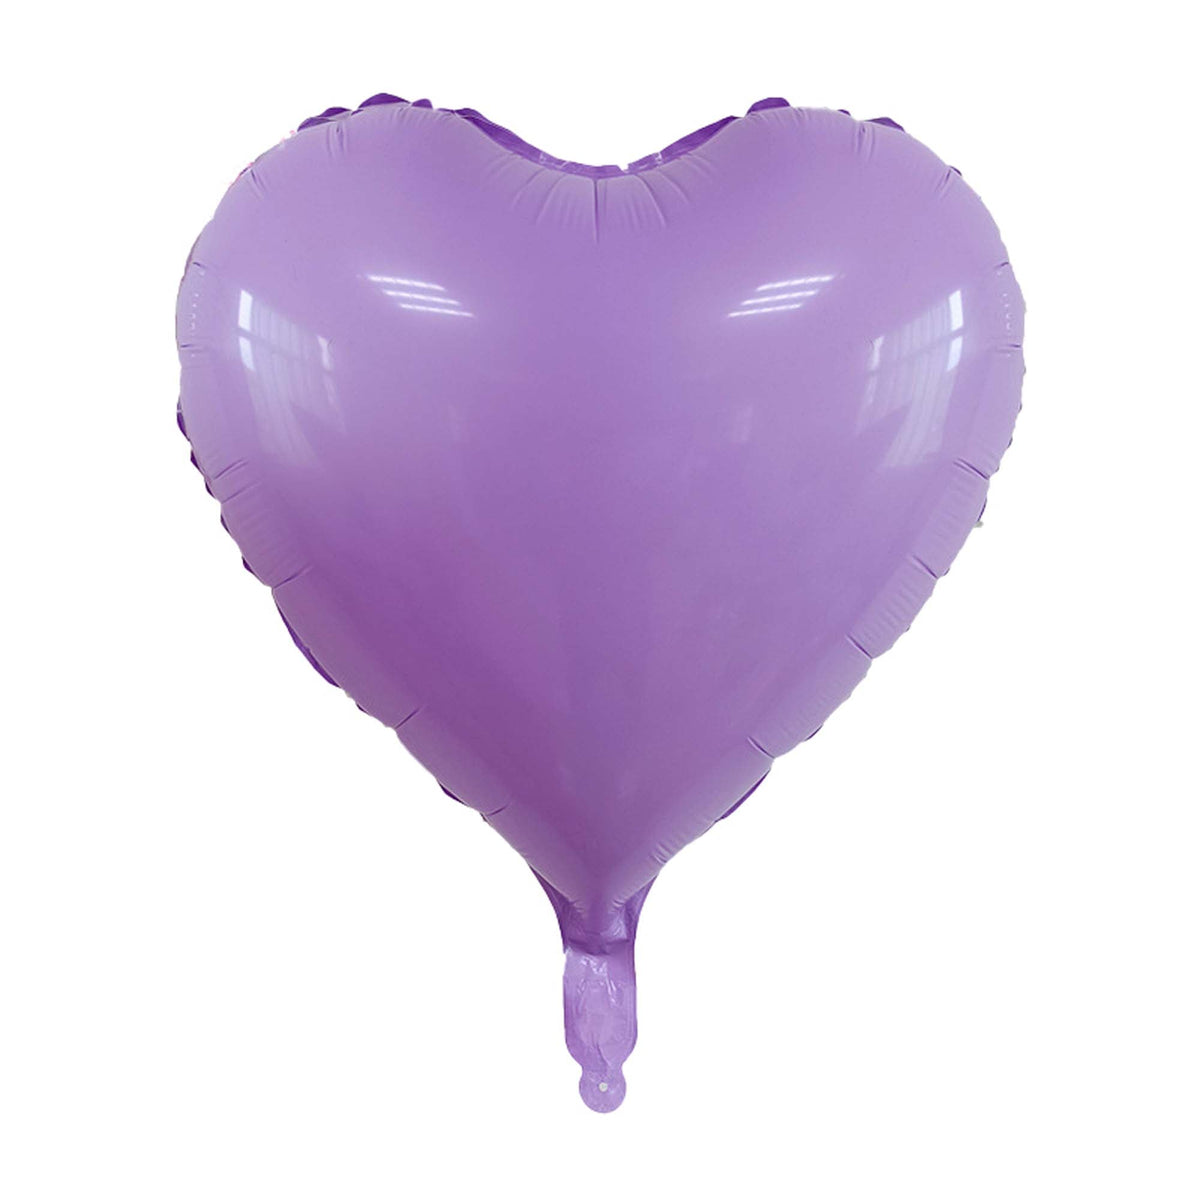 BOOMBA INTERNATIONAL TRADING CO,. LTD Balloons Pastel Light Purple Heart Shaped Foil Balloon, 18 Inches, 1 Count